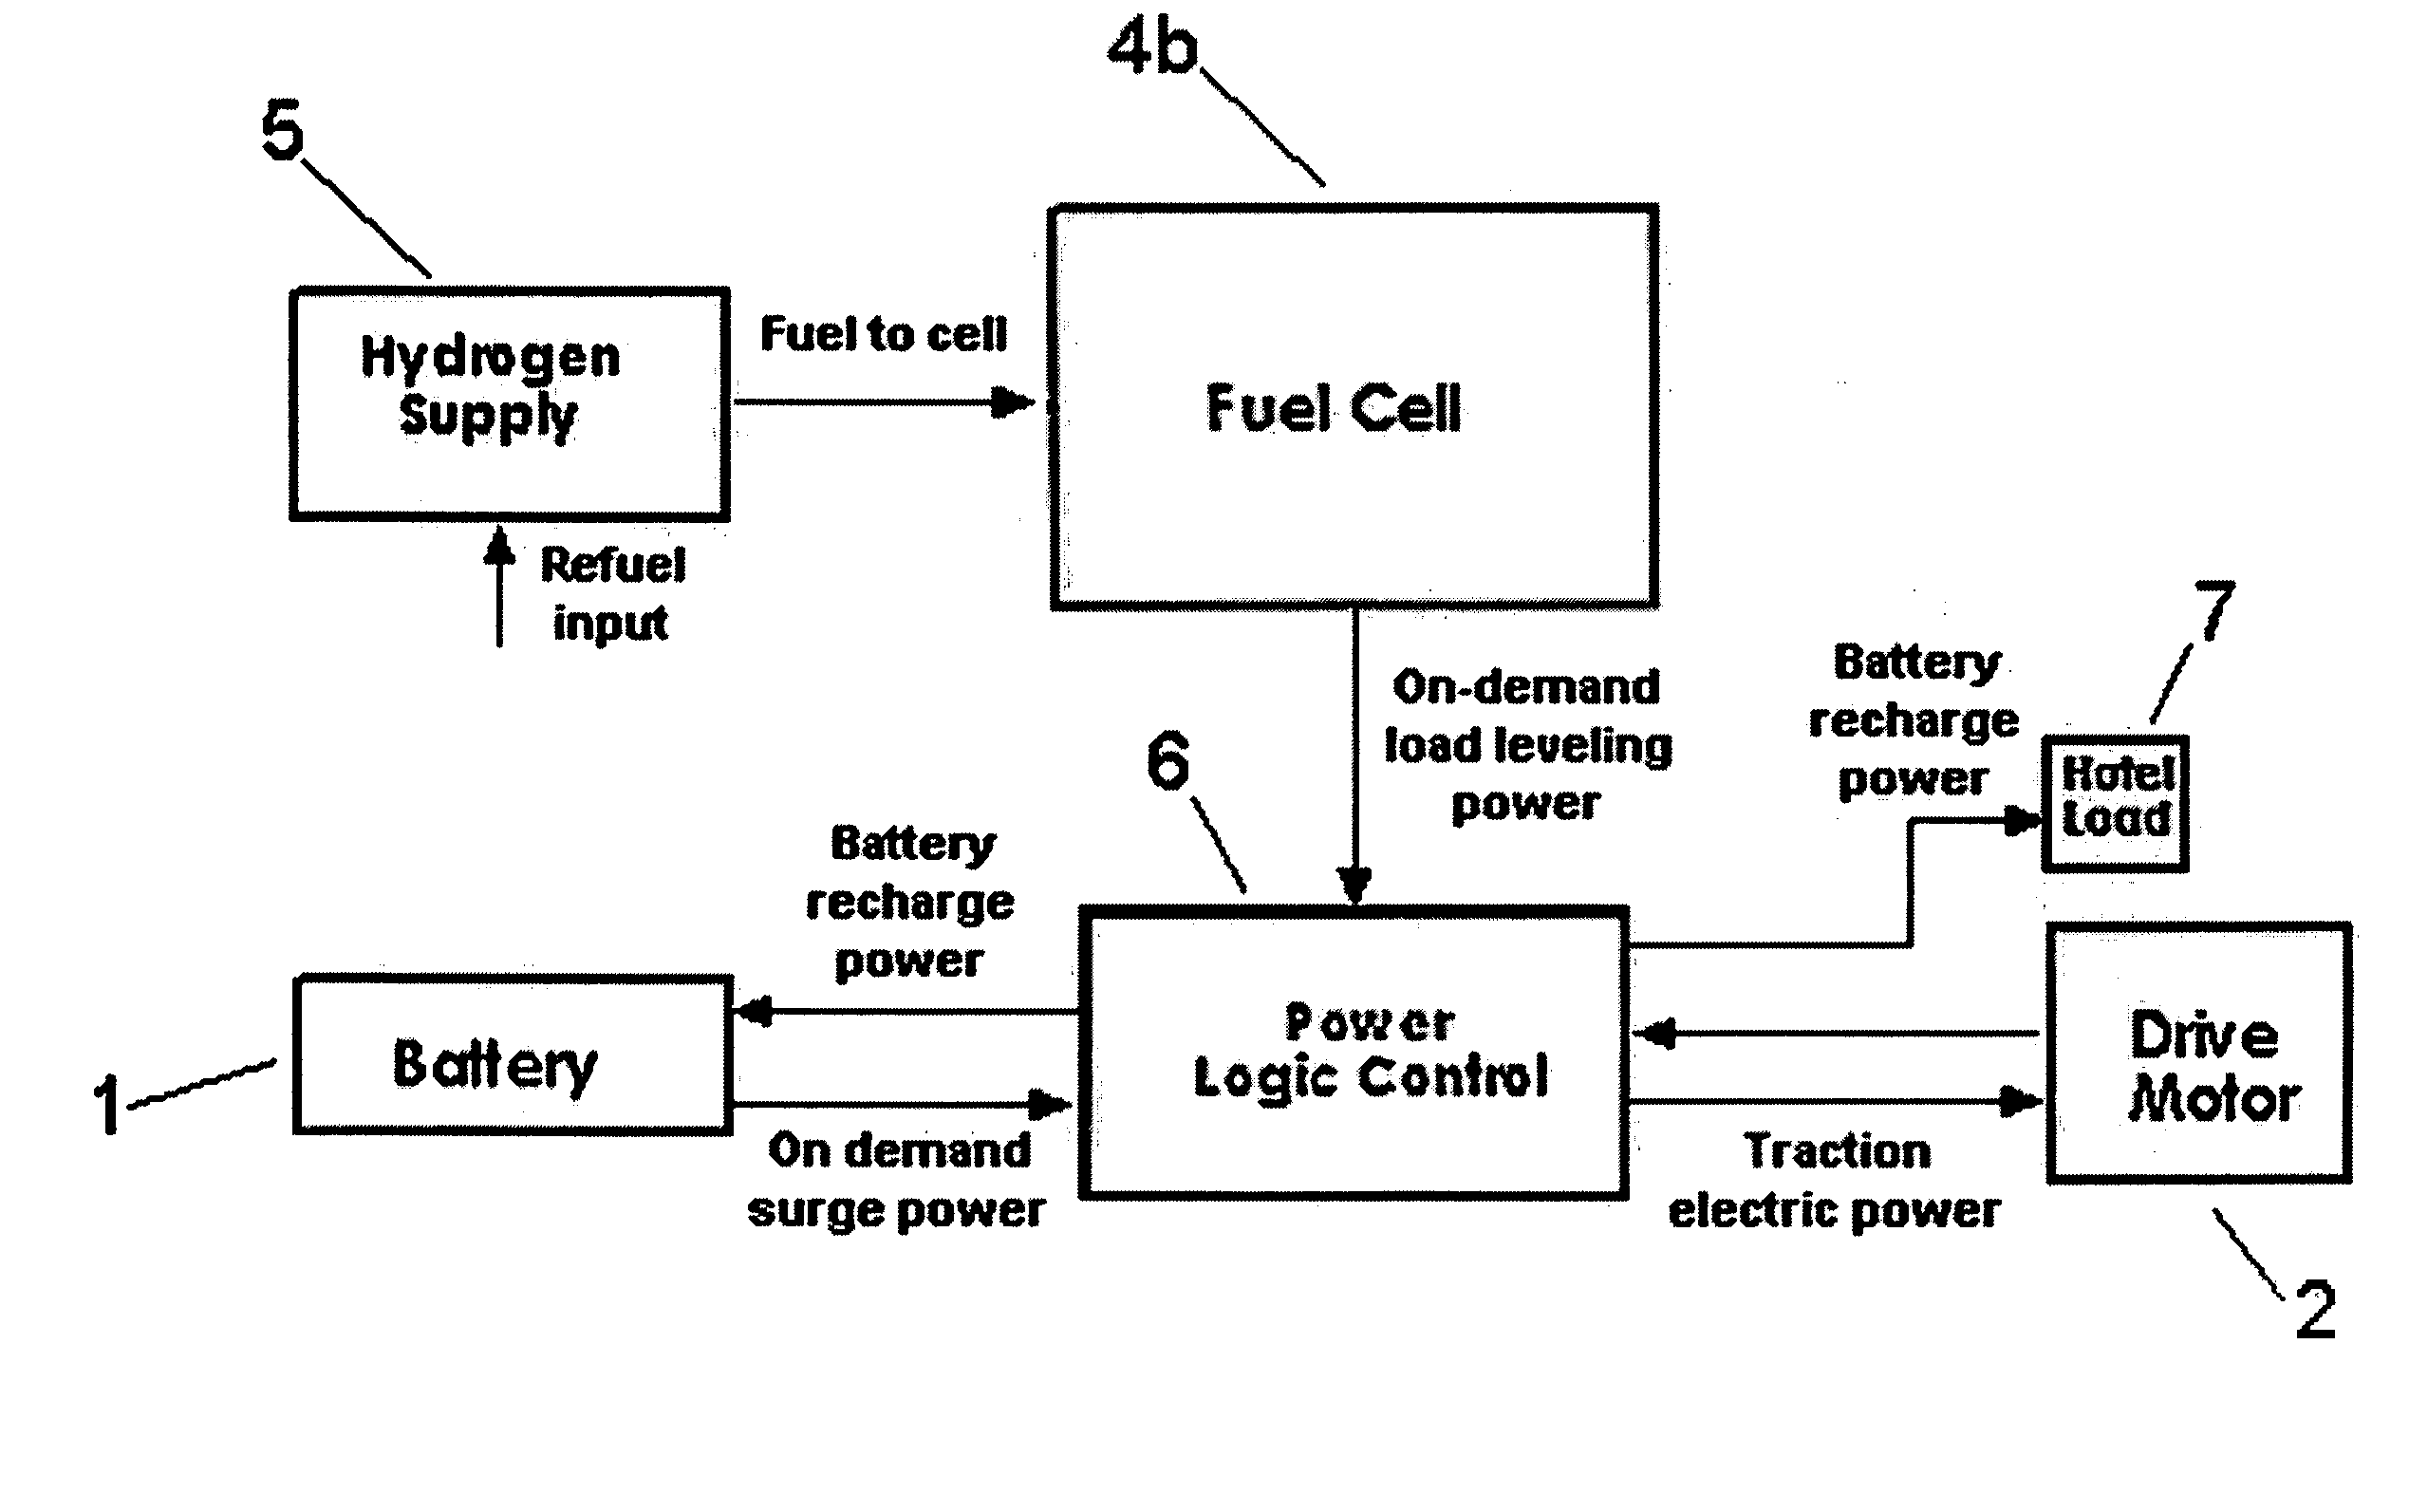 Drive system incorporating a hybrid fuel cell